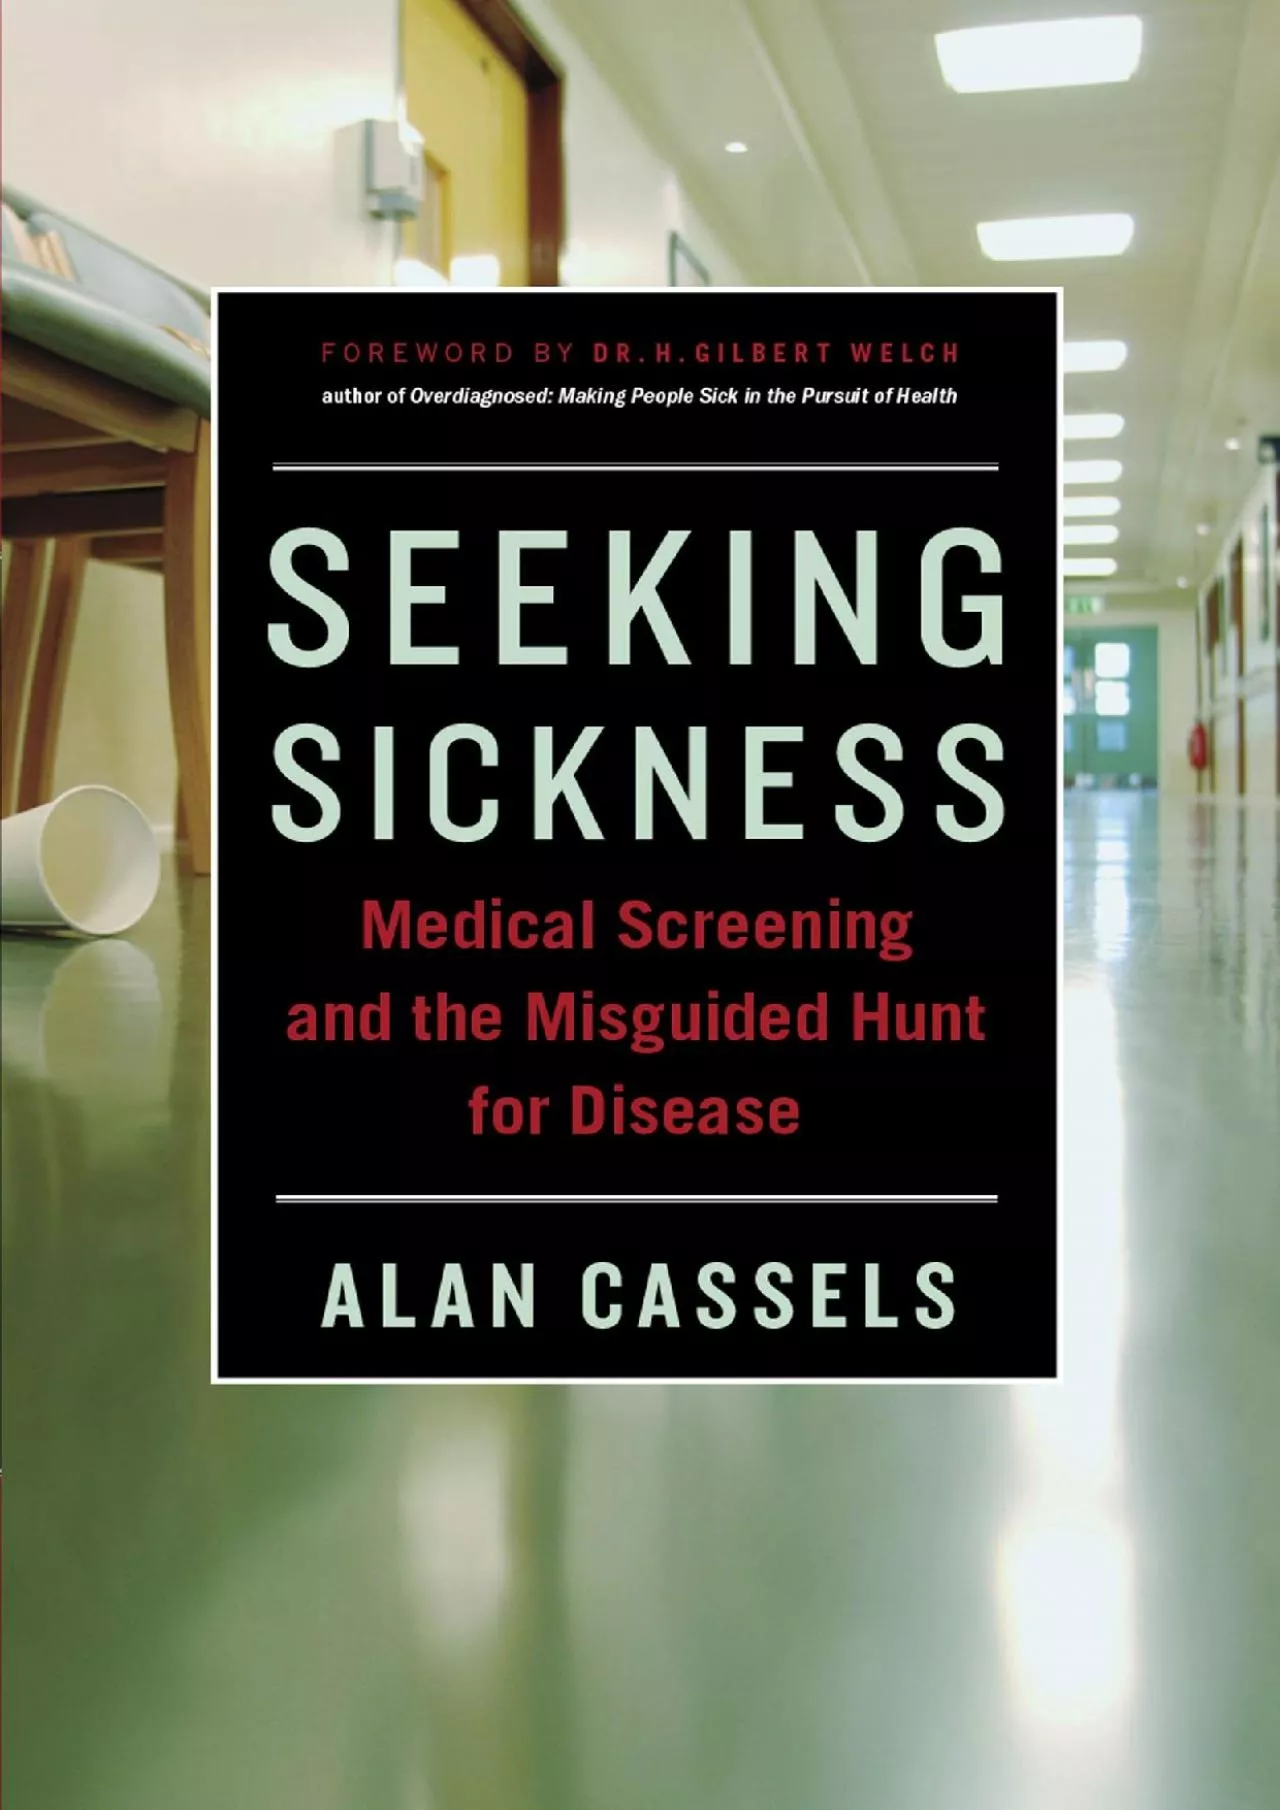 (BOOK)-Seeking Sickness: Medical Screening and the Misguided Hunt for Disease